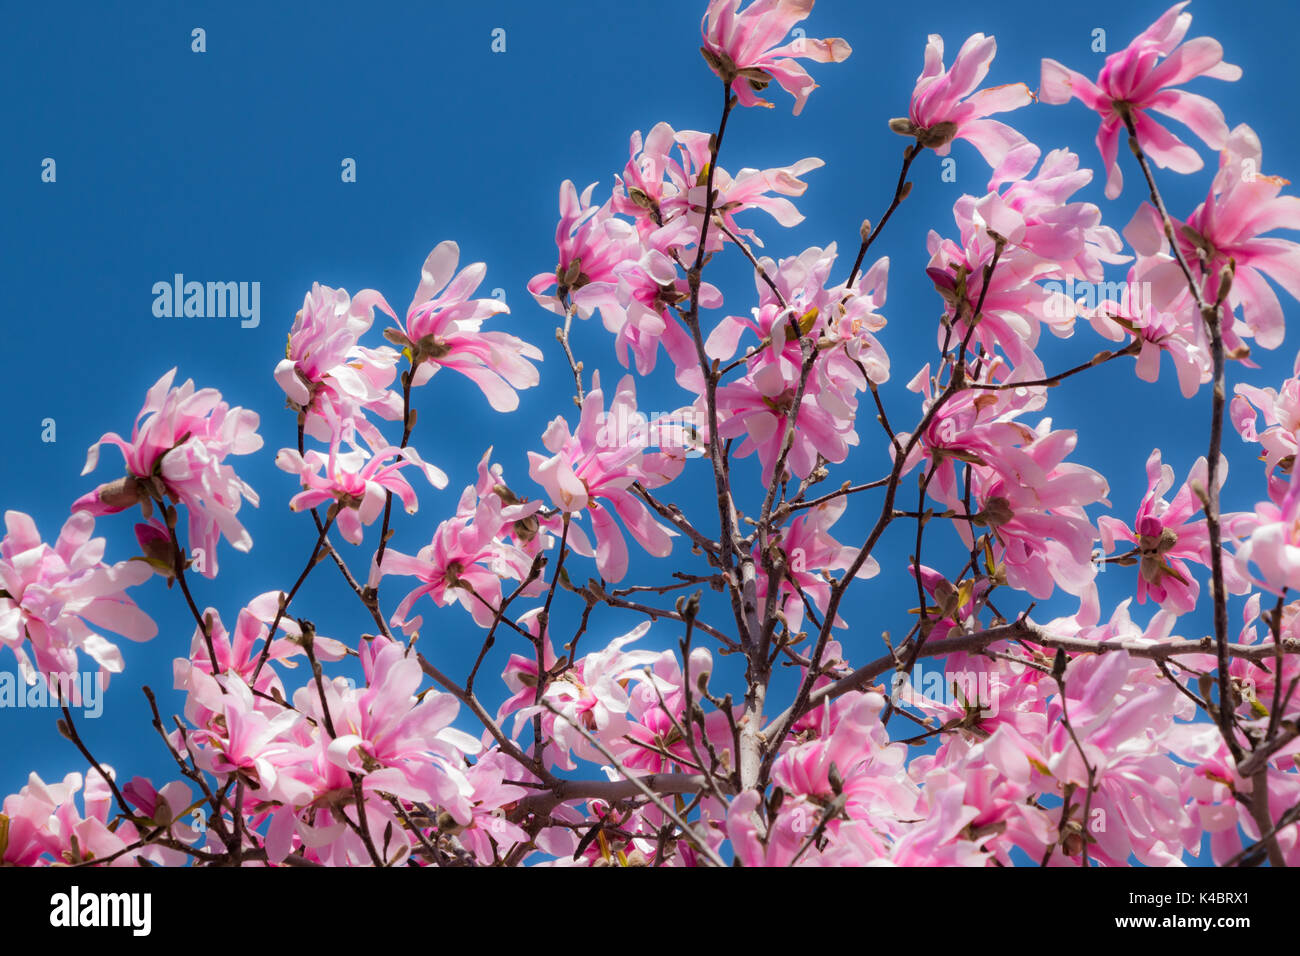 Pink Cherry blossom flowers in full bloom during spring. Stock Photo